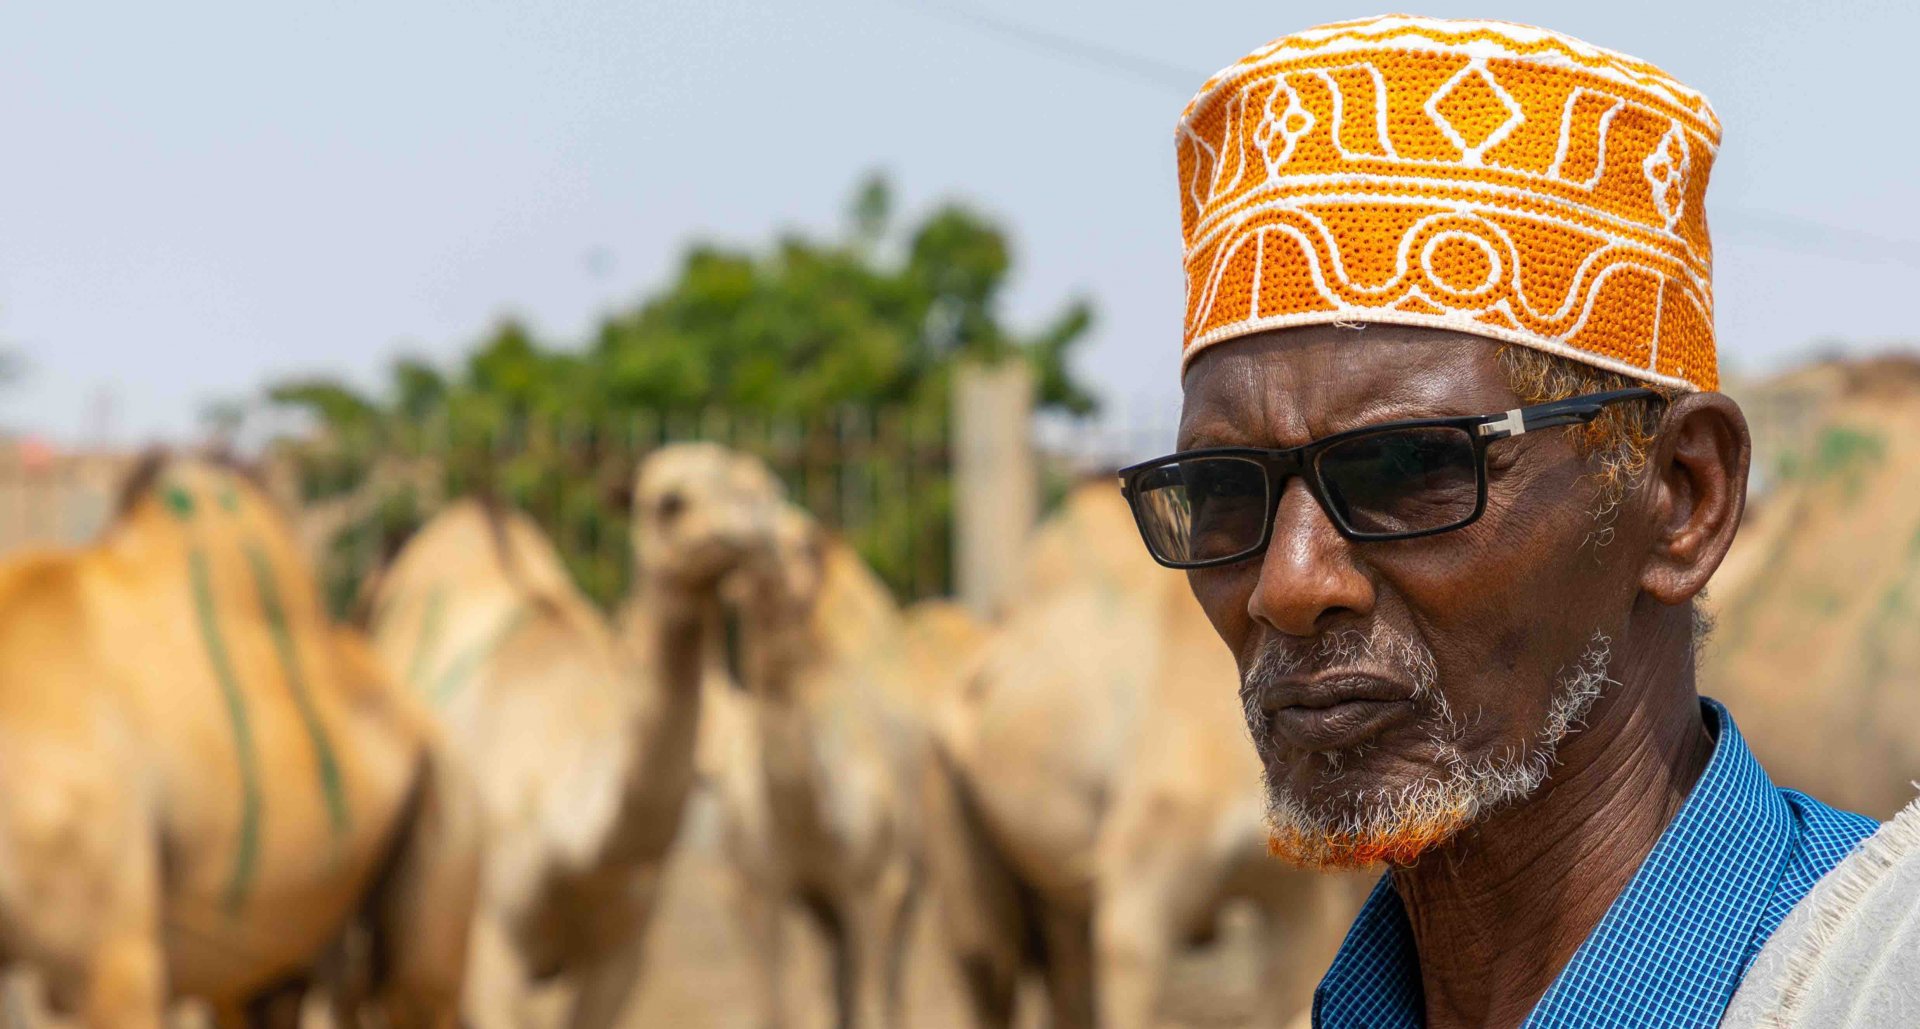 A Somali man wearing an orange embroidered cap stands in front of a heard of camels.